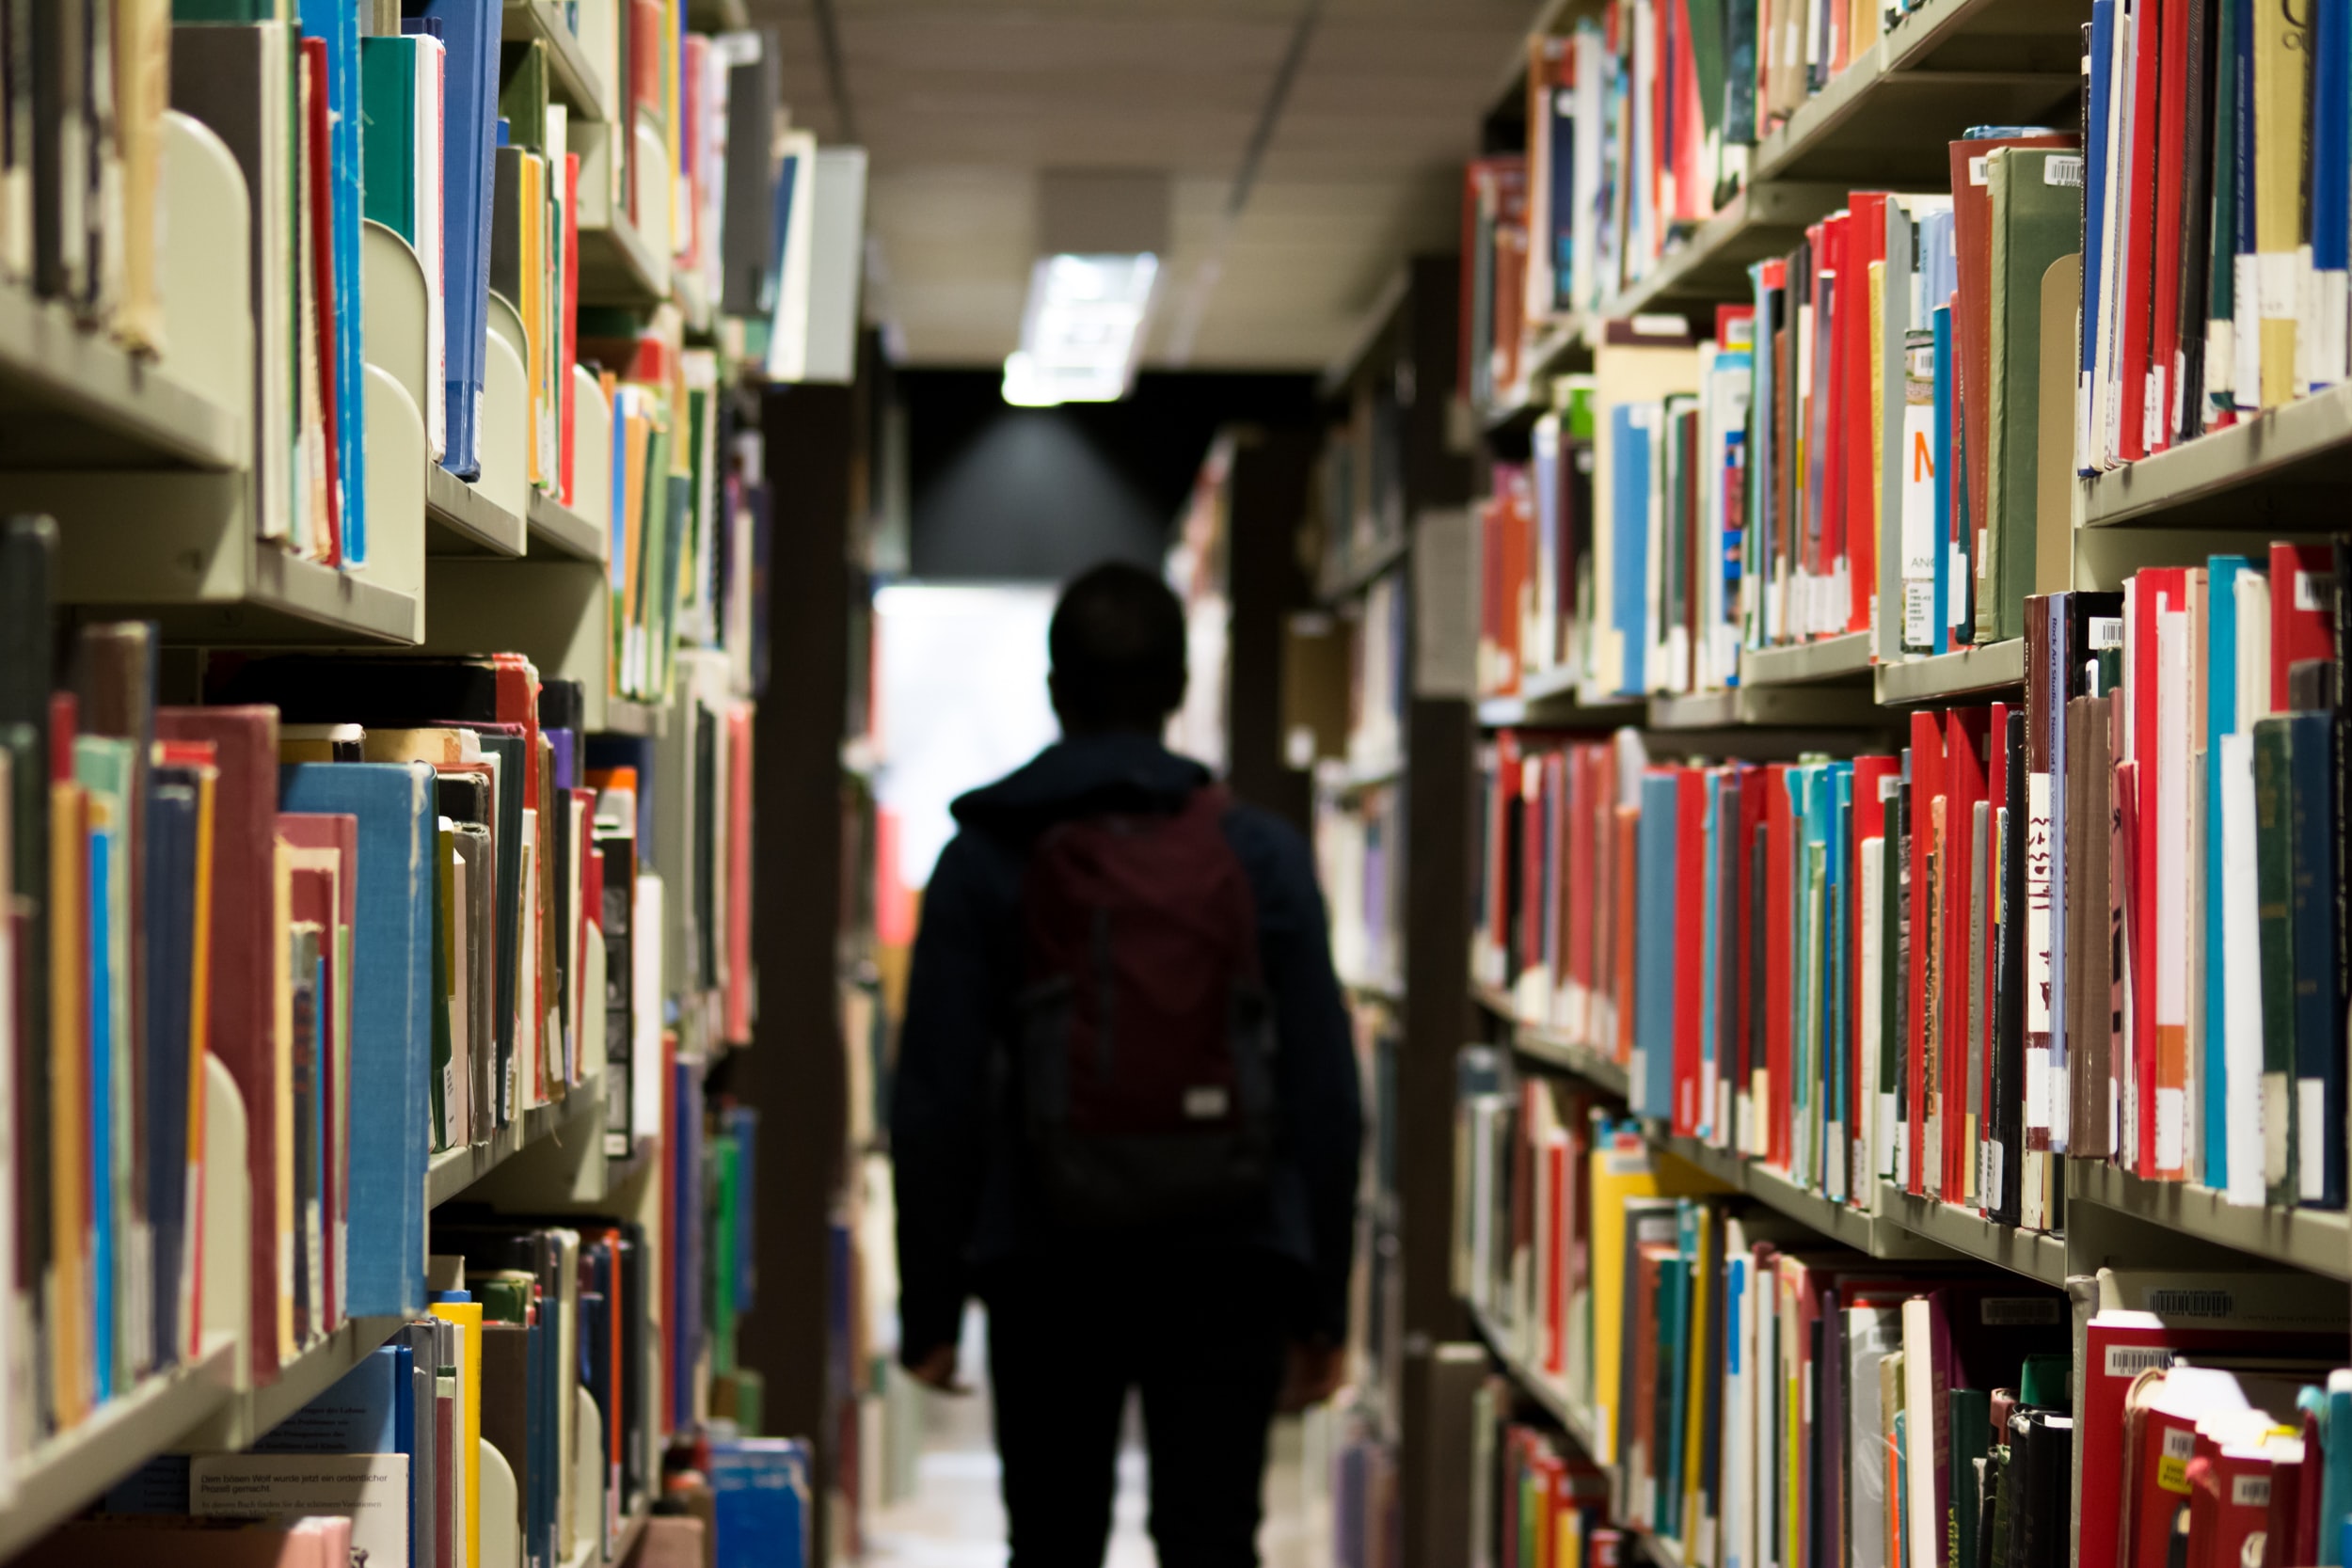 A student walking between library shelves.